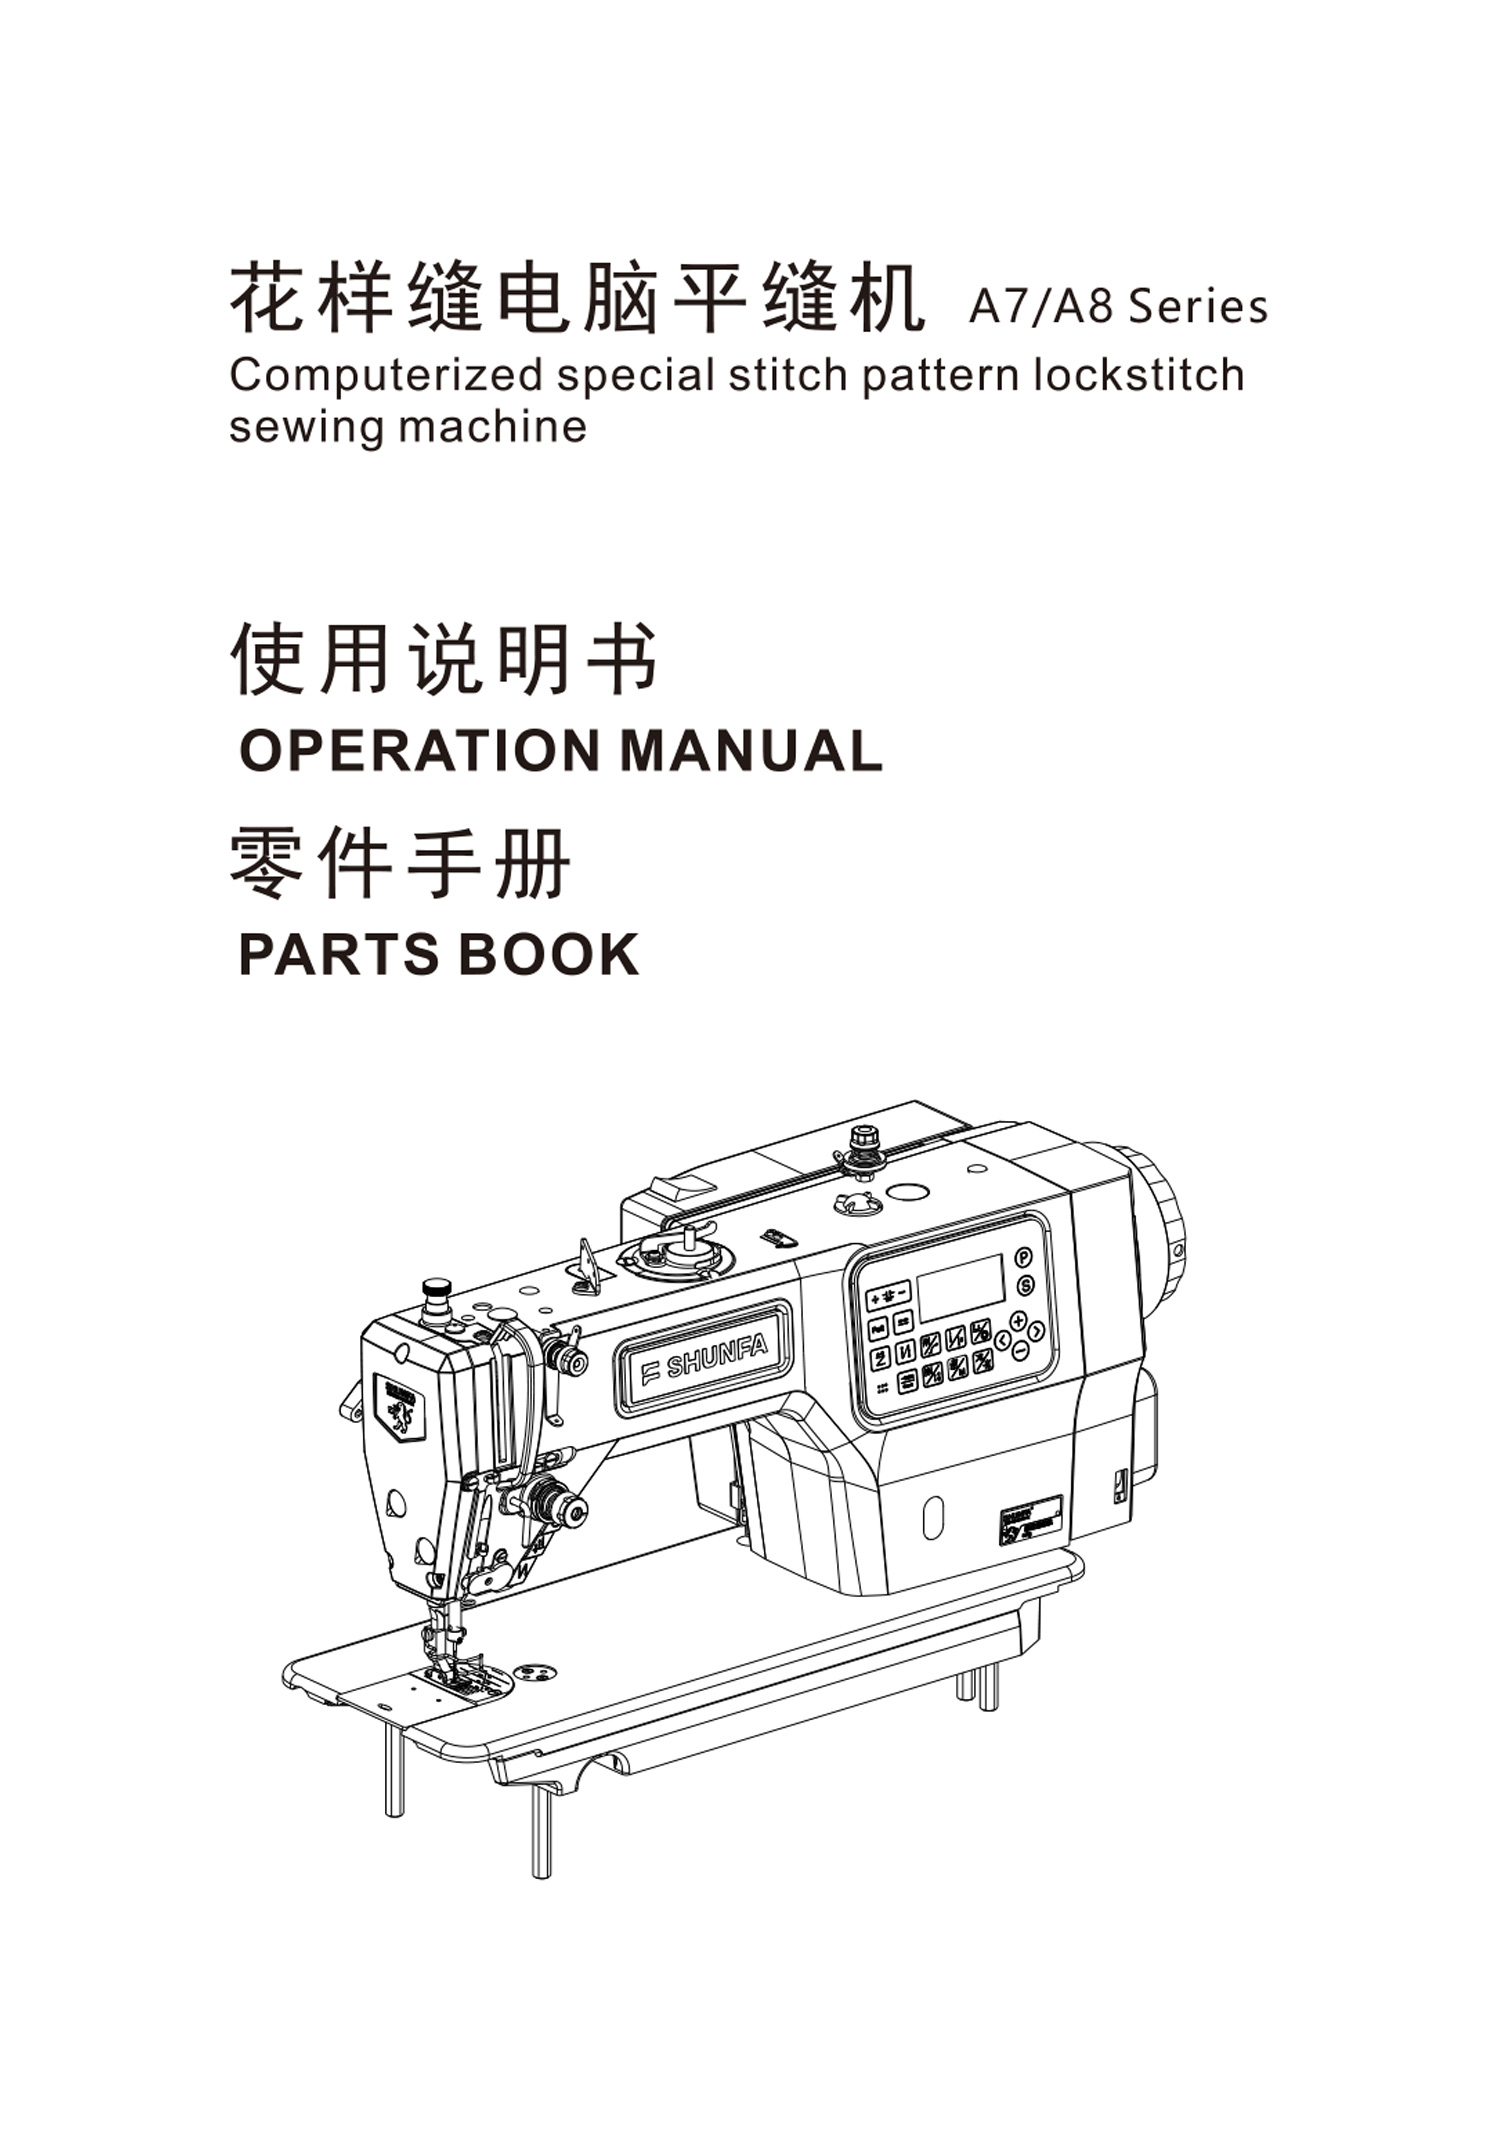 Upgraded double-step-motor-drive lockstitch sewing machine (suitable for different type of fabric,double moving knife,sealed oil tank)